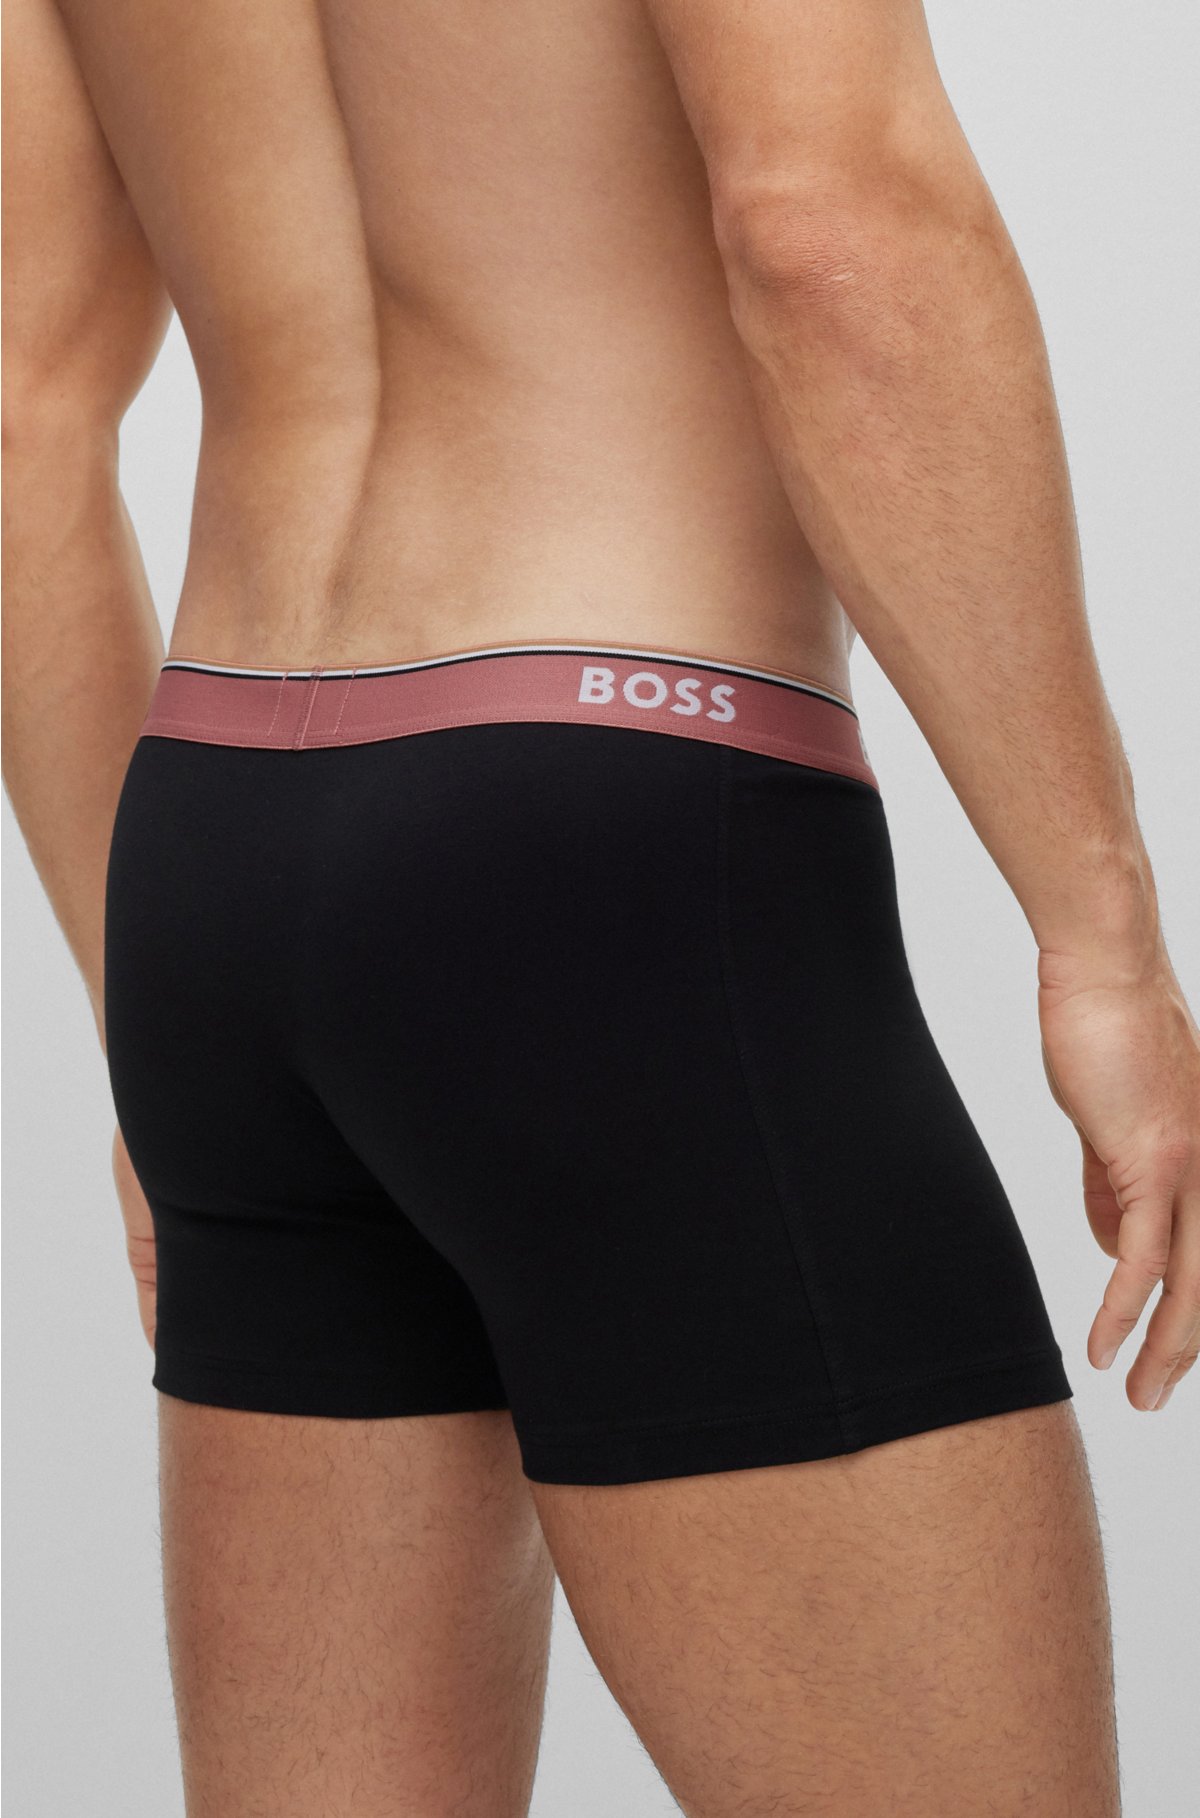 briefs of waistbands Three-pack with - logo boxer BOSS